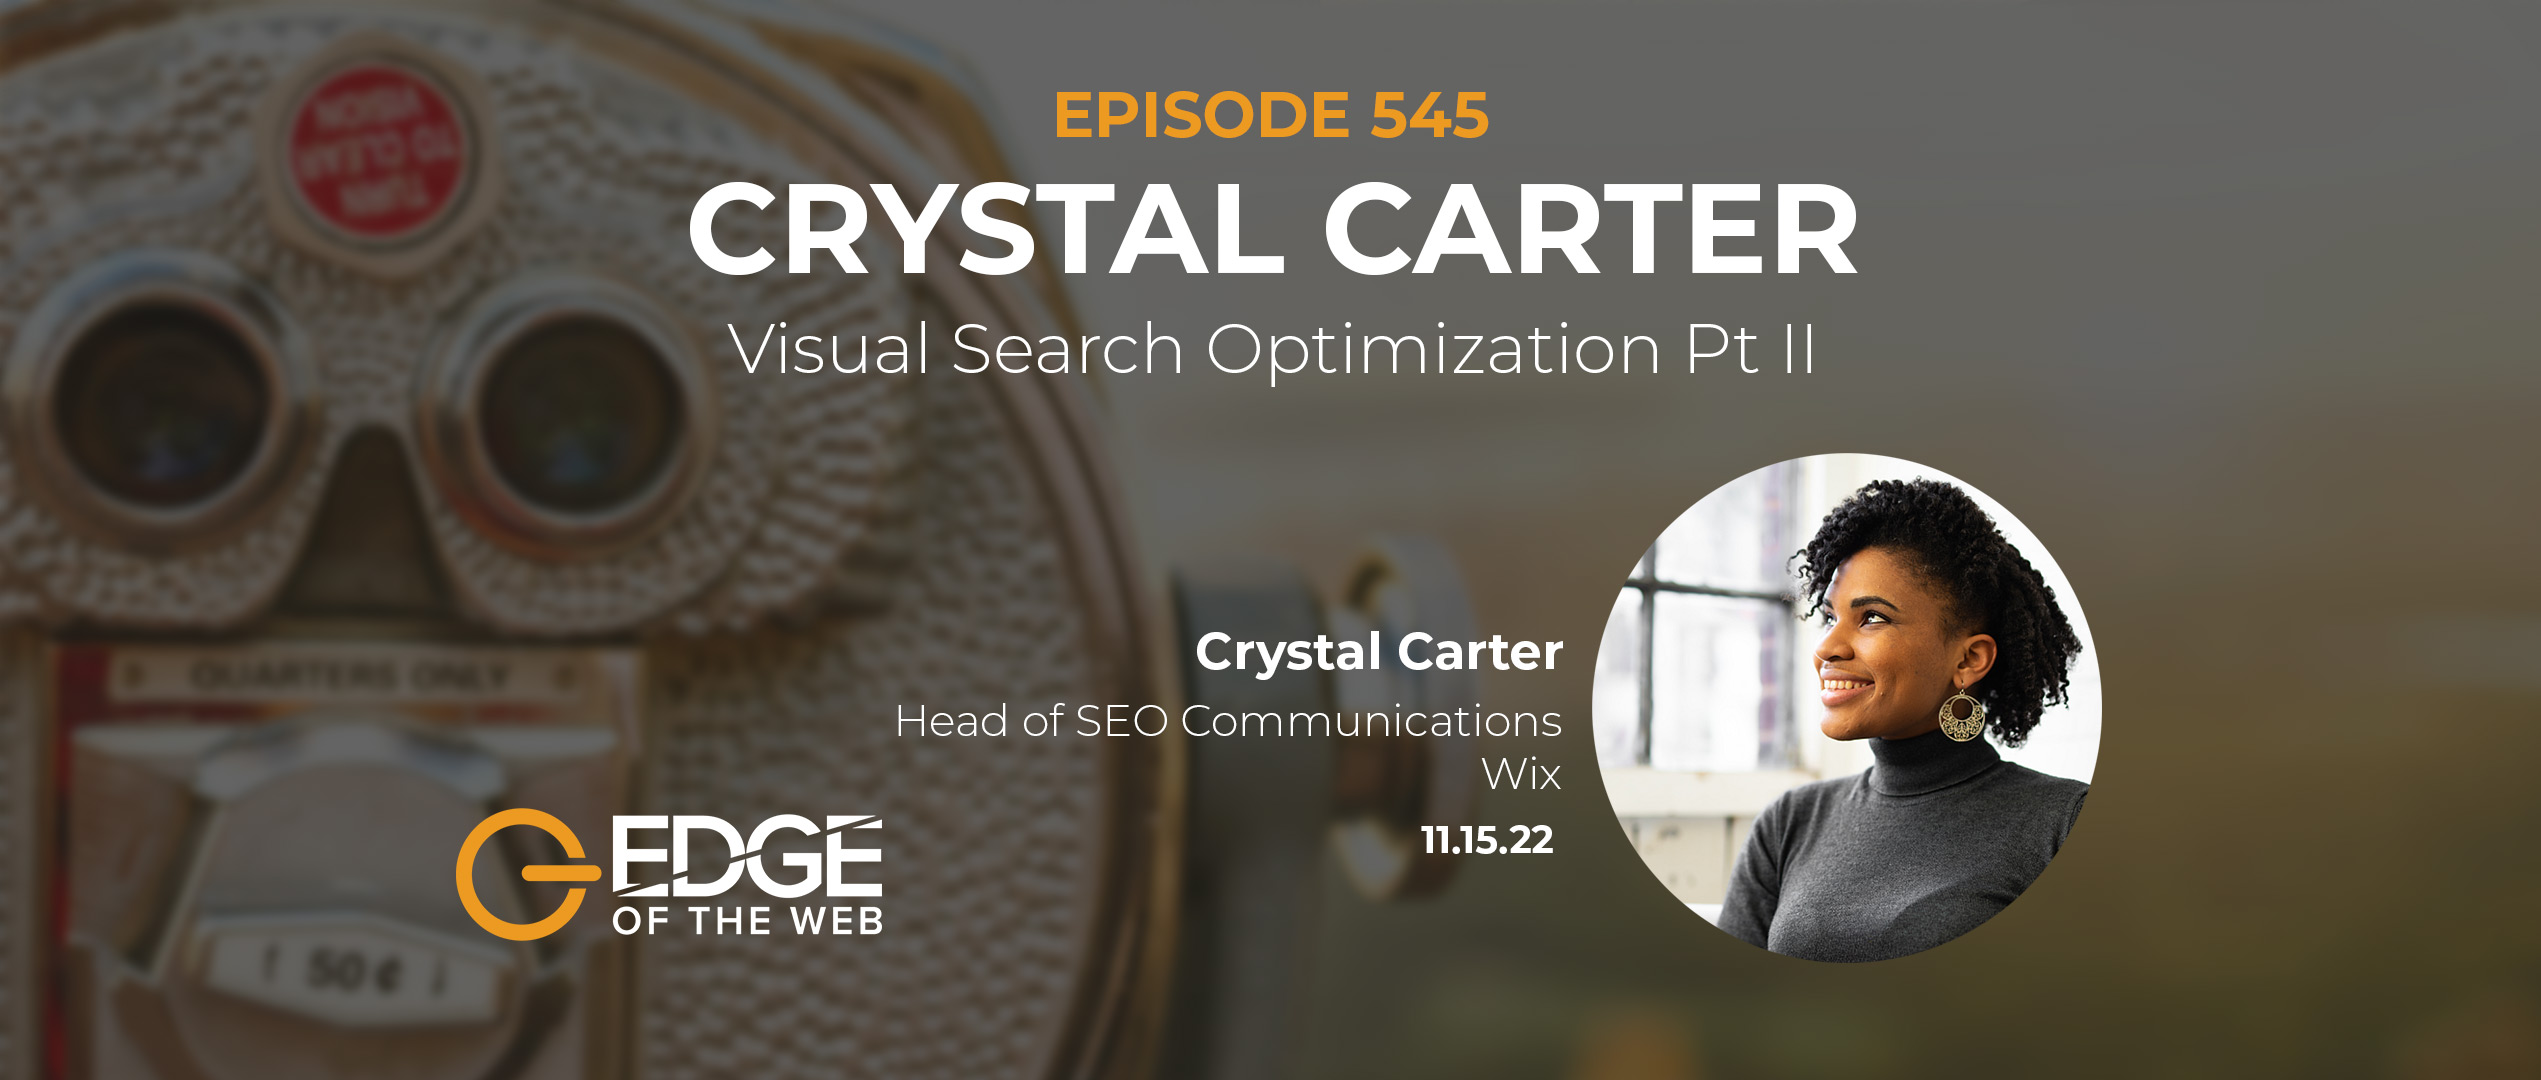 545 | Visual Search Optimization with Crystal Carter